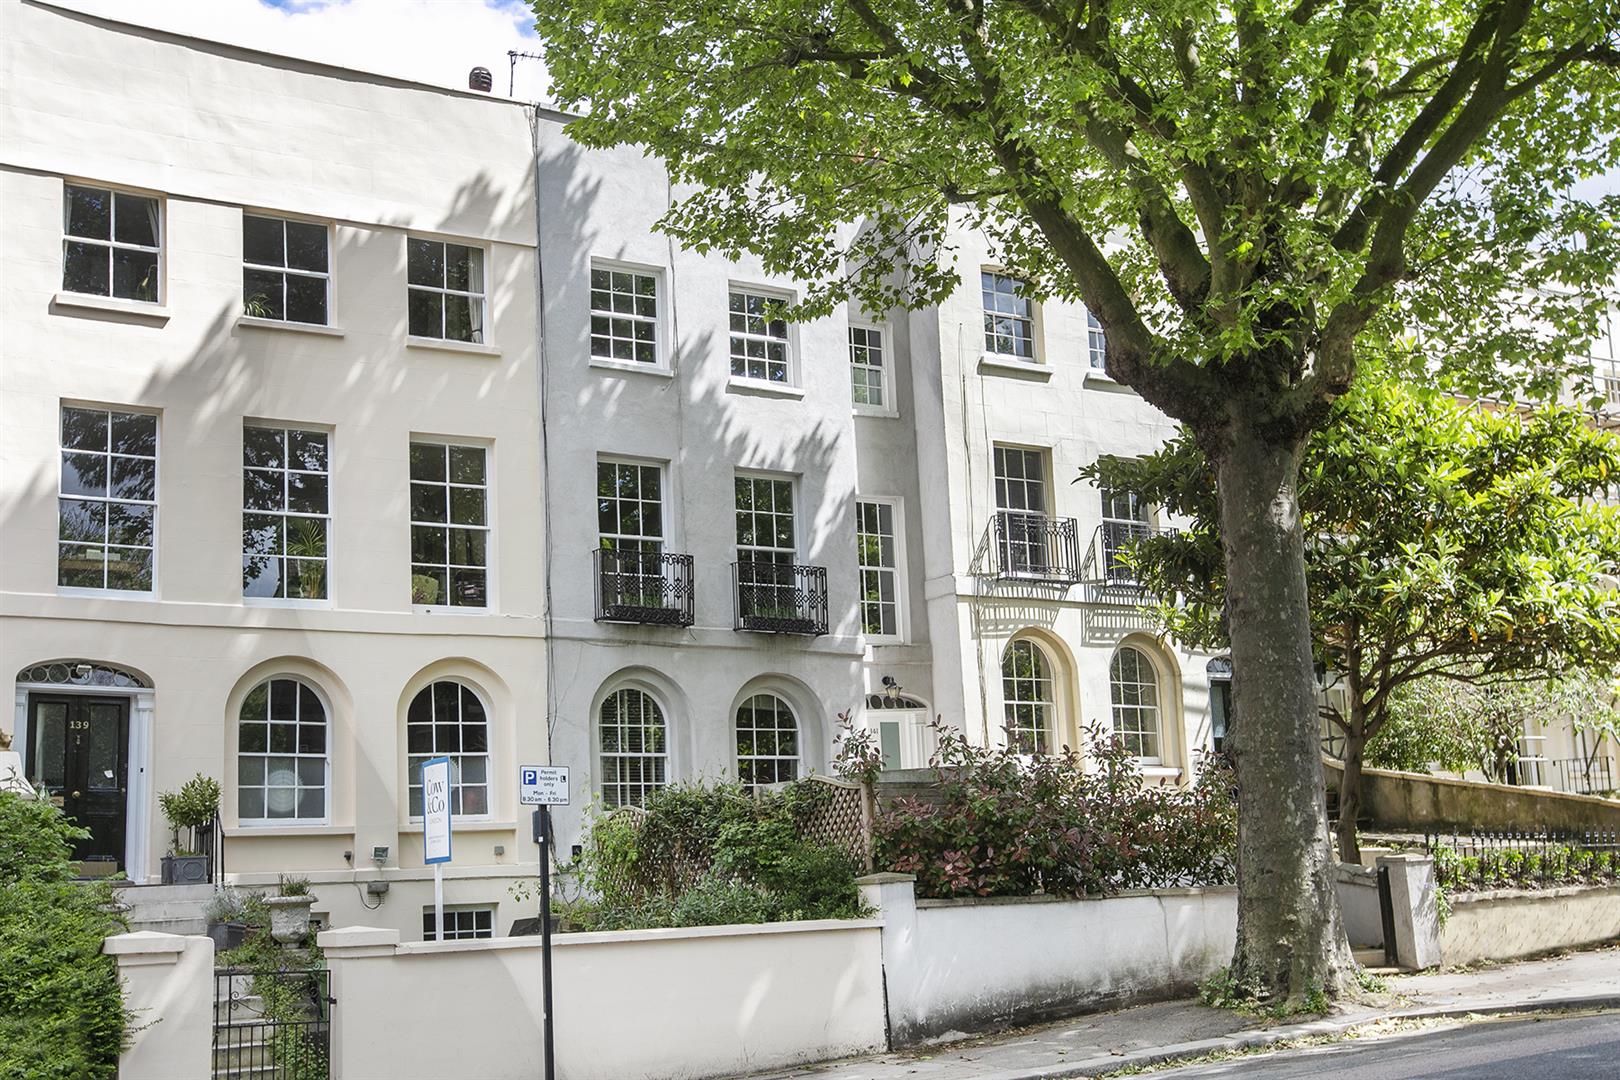 Flat - Conversion For Sale in Grove Lane, Camberwell, SE5 944 view1